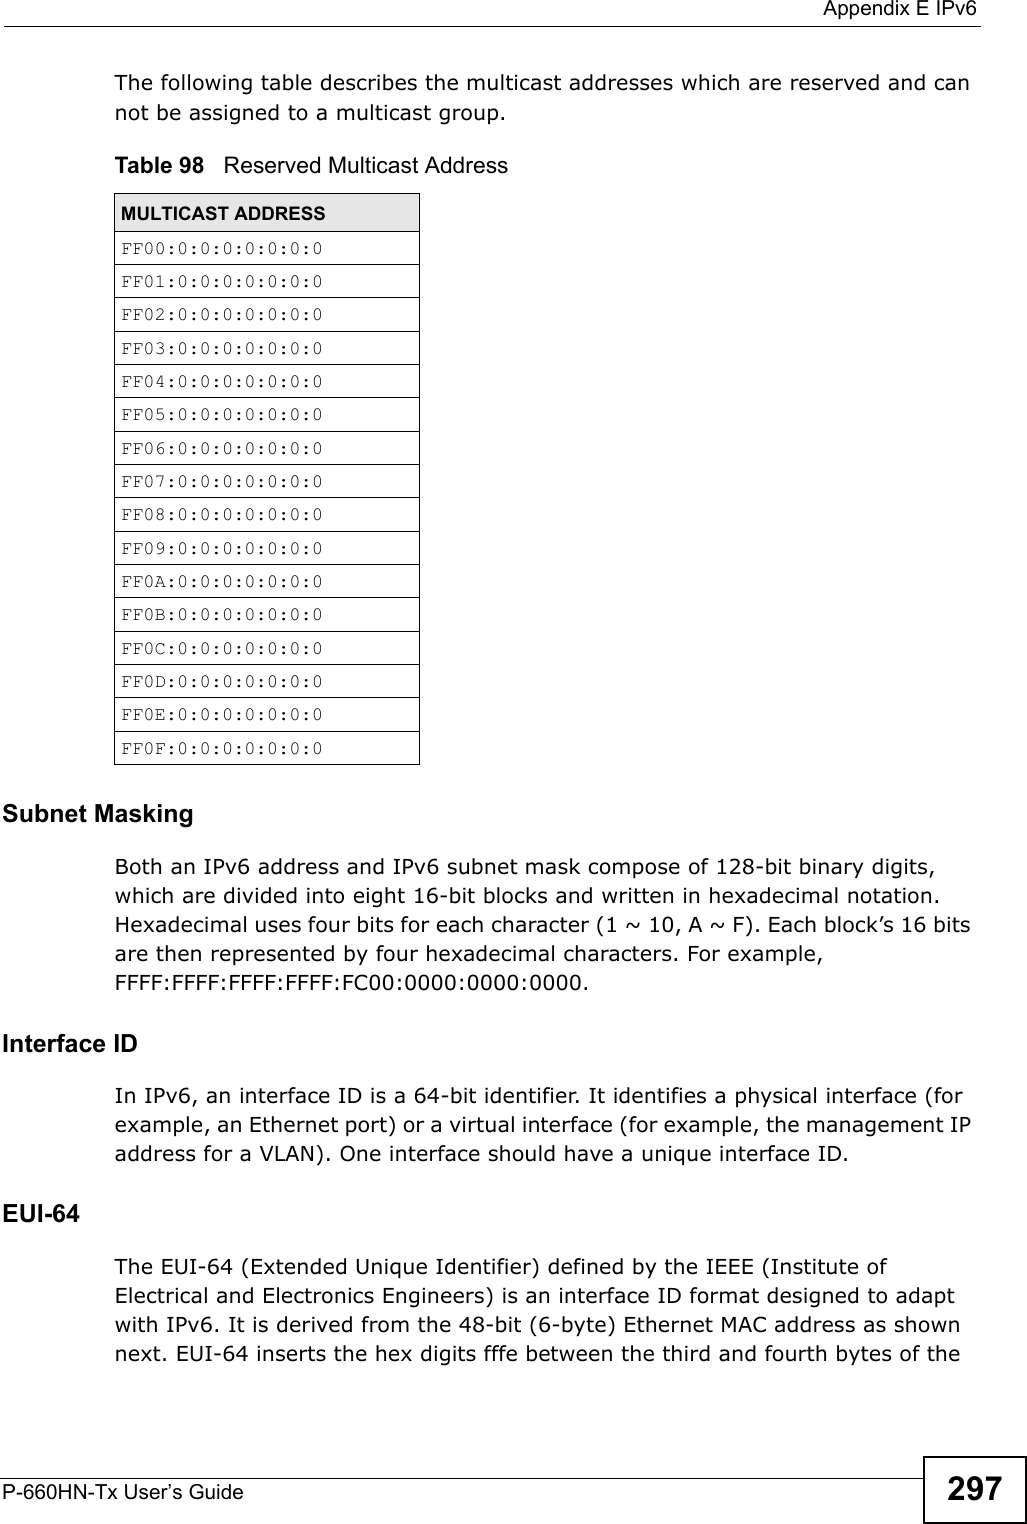  Appendix E IPv6P-660HN-Tx User’s Guide 297The following table describes the multicast addresses which are reserved and can not be assigned to a multicast group. Subnet MaskingBoth an IPv6 address and IPv6 subnet mask compose of 128-bit binary digits, which are divided into eight 16-bit blocks and written in hexadecimal notation. Hexadecimal uses four bits for each character (1 ~ 10, A ~ F). Each block’s 16 bits are then represented by four hexadecimal characters. For example, FFFF:FFFF:FFFF:FFFF:FC00:0000:0000:0000.Interface IDIn IPv6, an interface ID is a 64-bit identifier. It identifies a physical interface (for example, an Ethernet port) or a virtual interface (for example, the management IP address for a VLAN). One interface should have a unique interface ID.EUI-64The EUI-64 (Extended Unique Identifier) defined by the IEEE (Institute of Electrical and Electronics Engineers) is an interface ID format designed to adapt with IPv6. It is derived from the 48-bit (6-byte) Ethernet MAC address as shown next. EUI-64 inserts the hex digits fffe between the third and fourth bytes of the Table 98   Reserved Multicast AddressMULTICAST ADDRESSFF00:0:0:0:0:0:0:0FF01:0:0:0:0:0:0:0FF02:0:0:0:0:0:0:0FF03:0:0:0:0:0:0:0FF04:0:0:0:0:0:0:0FF05:0:0:0:0:0:0:0FF06:0:0:0:0:0:0:0FF07:0:0:0:0:0:0:0FF08:0:0:0:0:0:0:0FF09:0:0:0:0:0:0:0FF0A:0:0:0:0:0:0:0FF0B:0:0:0:0:0:0:0FF0C:0:0:0:0:0:0:0FF0D:0:0:0:0:0:0:0FF0E:0:0:0:0:0:0:0FF0F:0:0:0:0:0:0:0